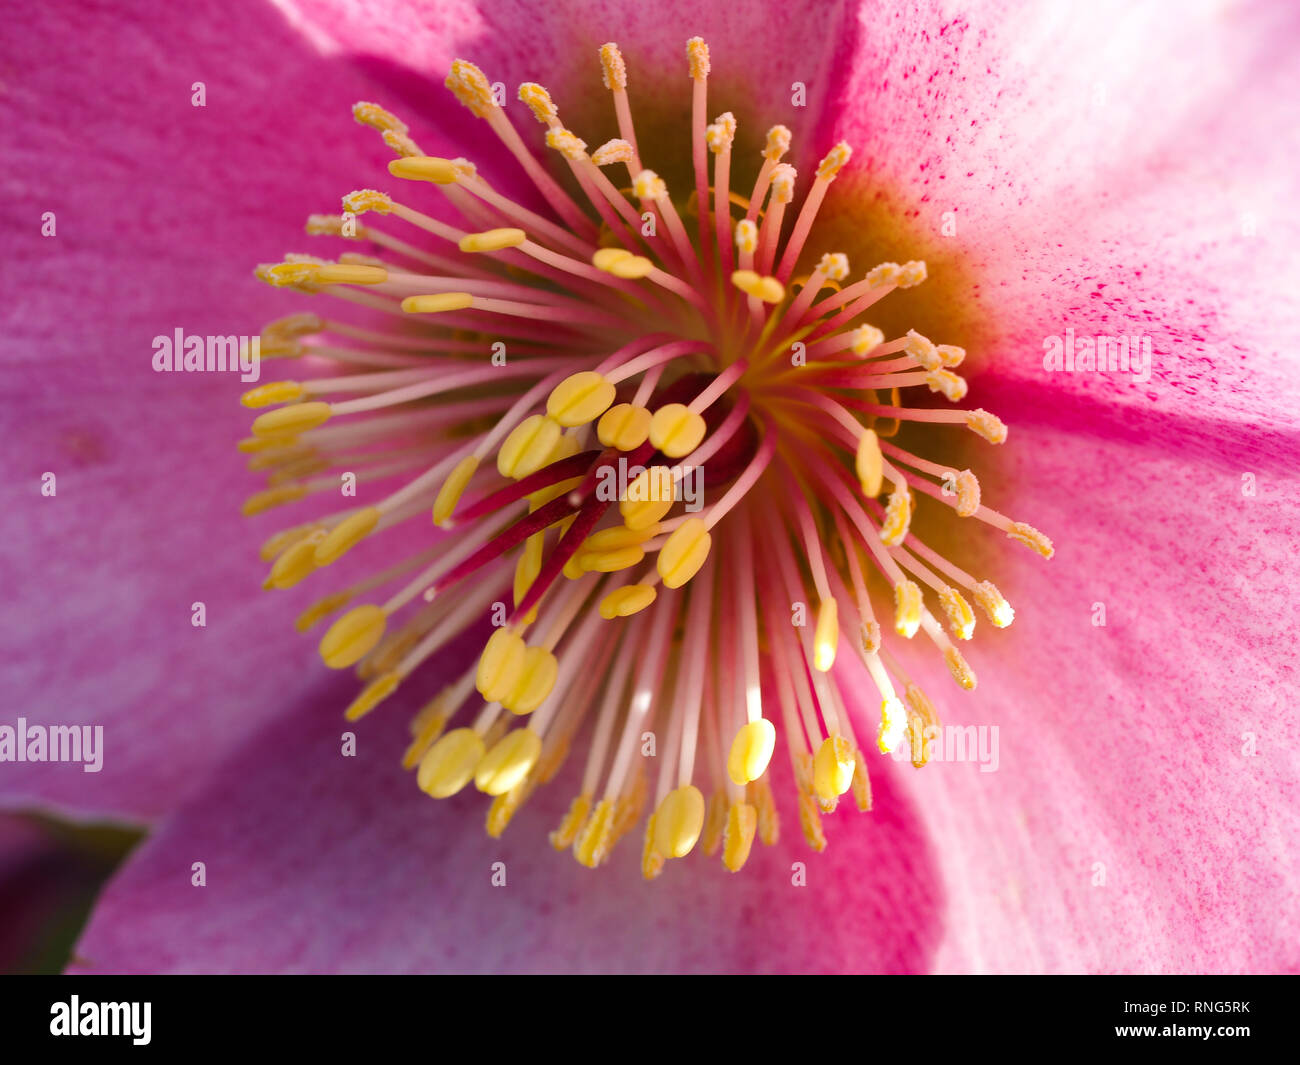 Closeup of the yellow stamens and anthers of a beautiful pink Hellebore flower Stock Photo